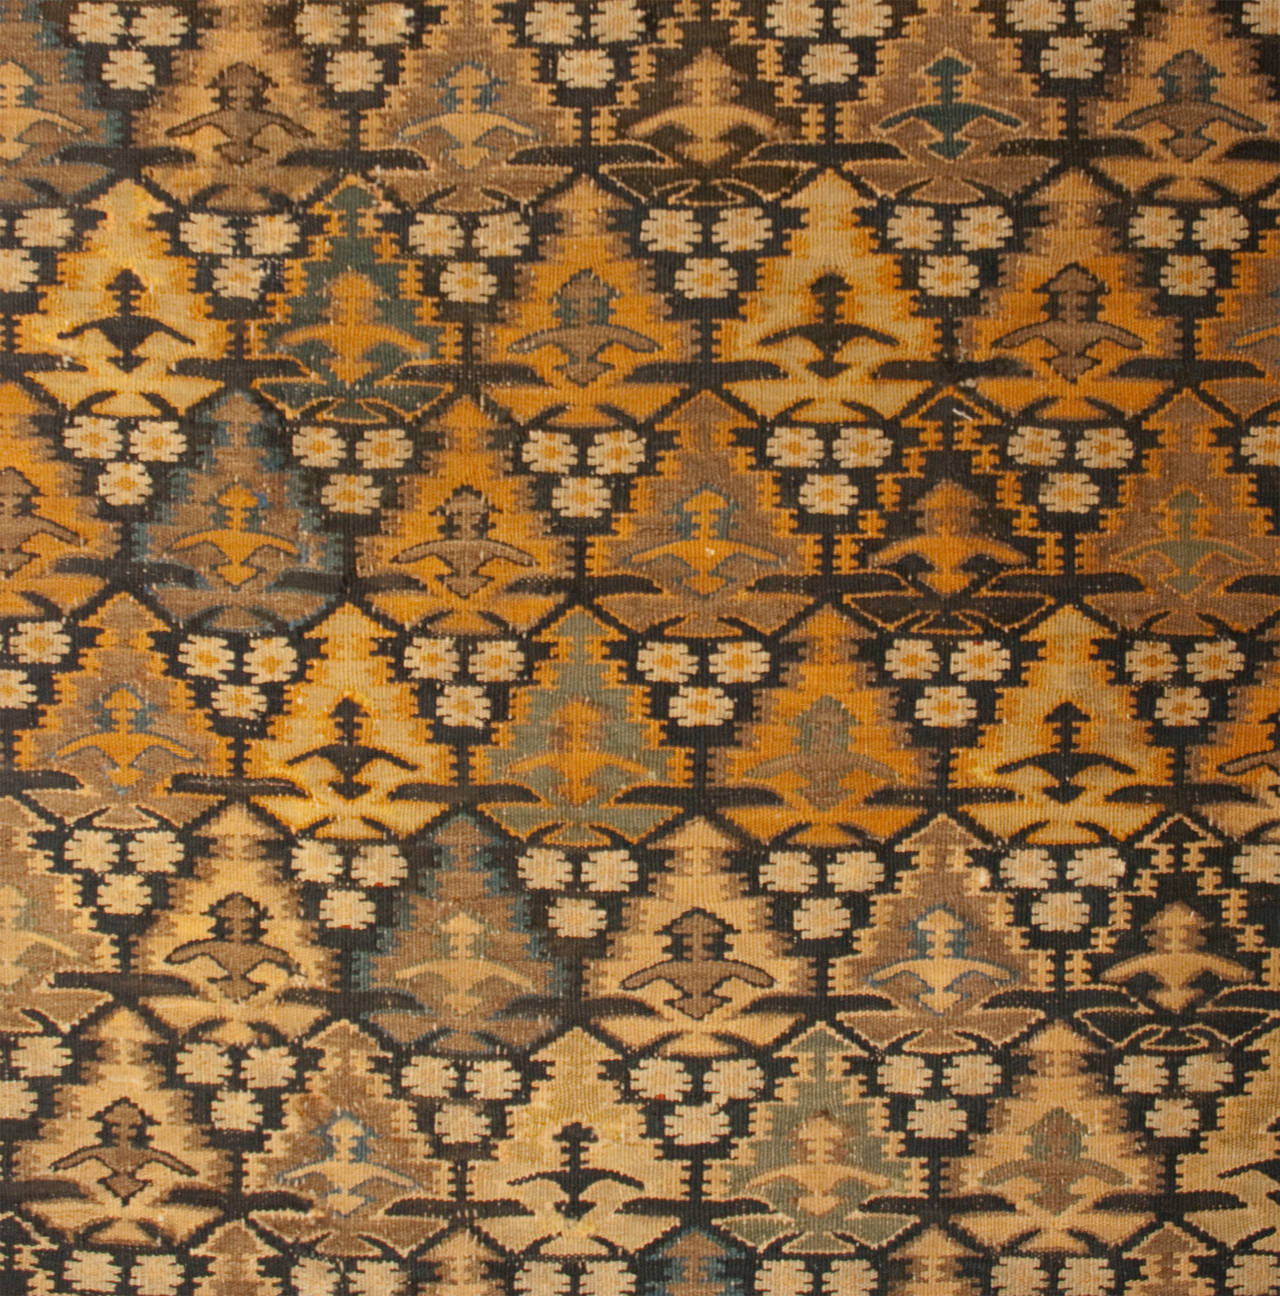 An early 20th century Persian Qazvin Kilim runner with an all-over multicolored tree-of-life pattern surrounded by multiple complementary geometric and floral border.